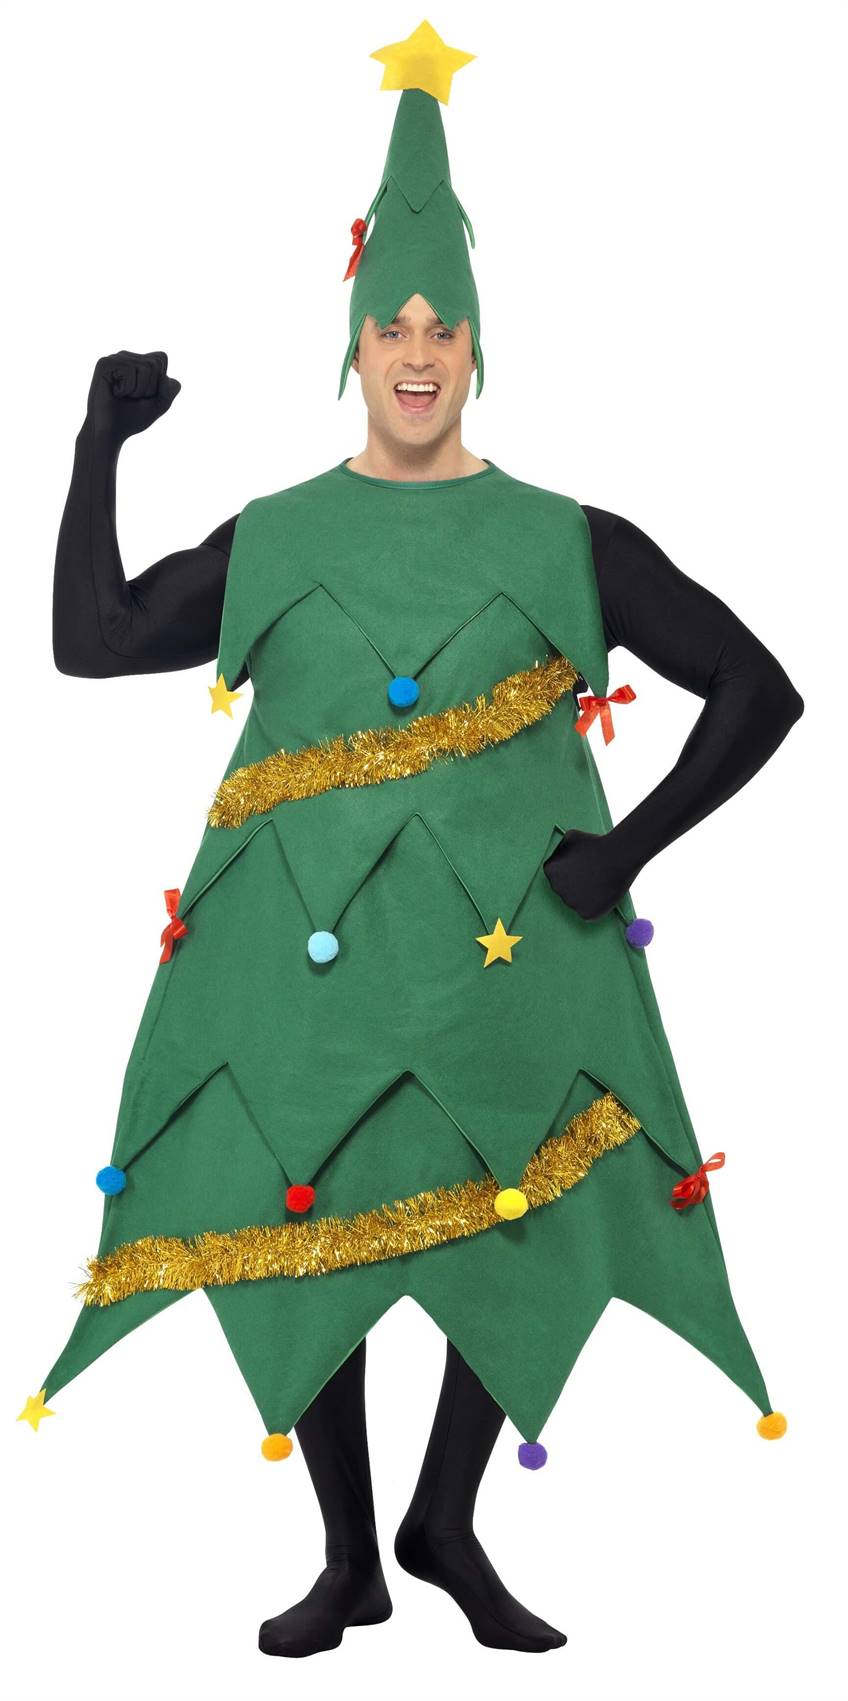 9 Funny Christmas Outfits Ideas for Men and Women – EntertainmentMesh